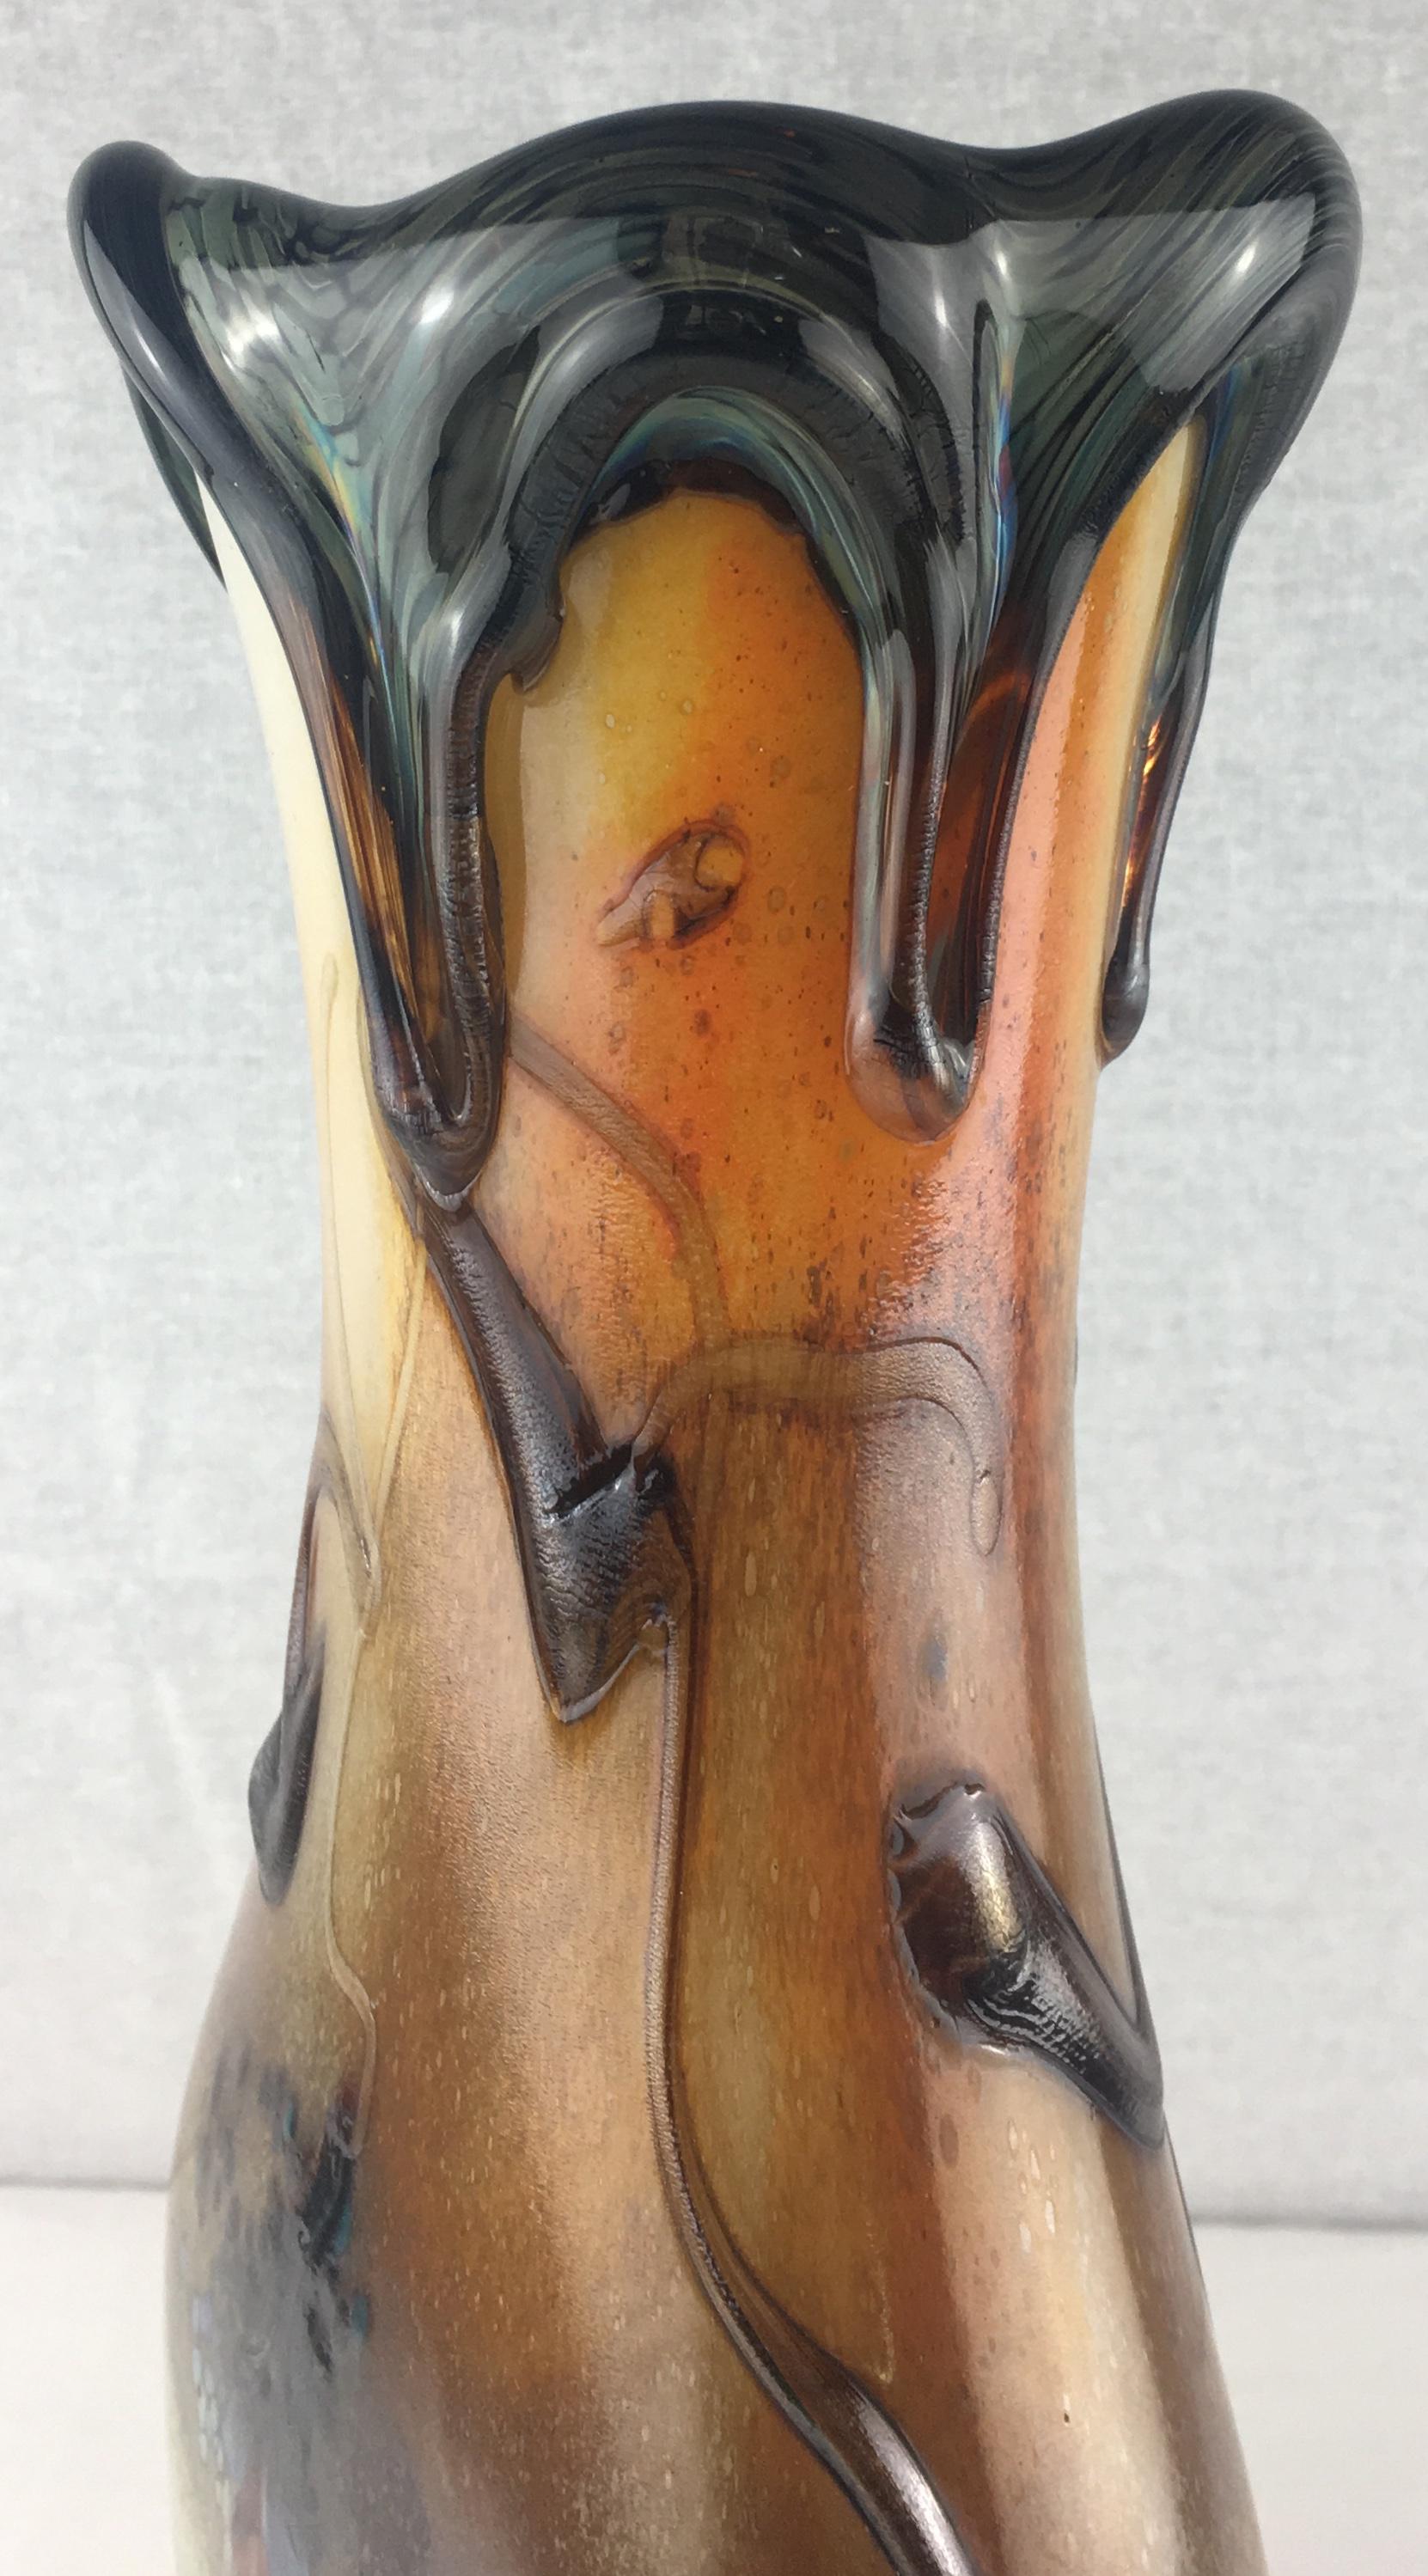 French Art Nouveau Style Vase signed Guyot and Aconito from Biot, France